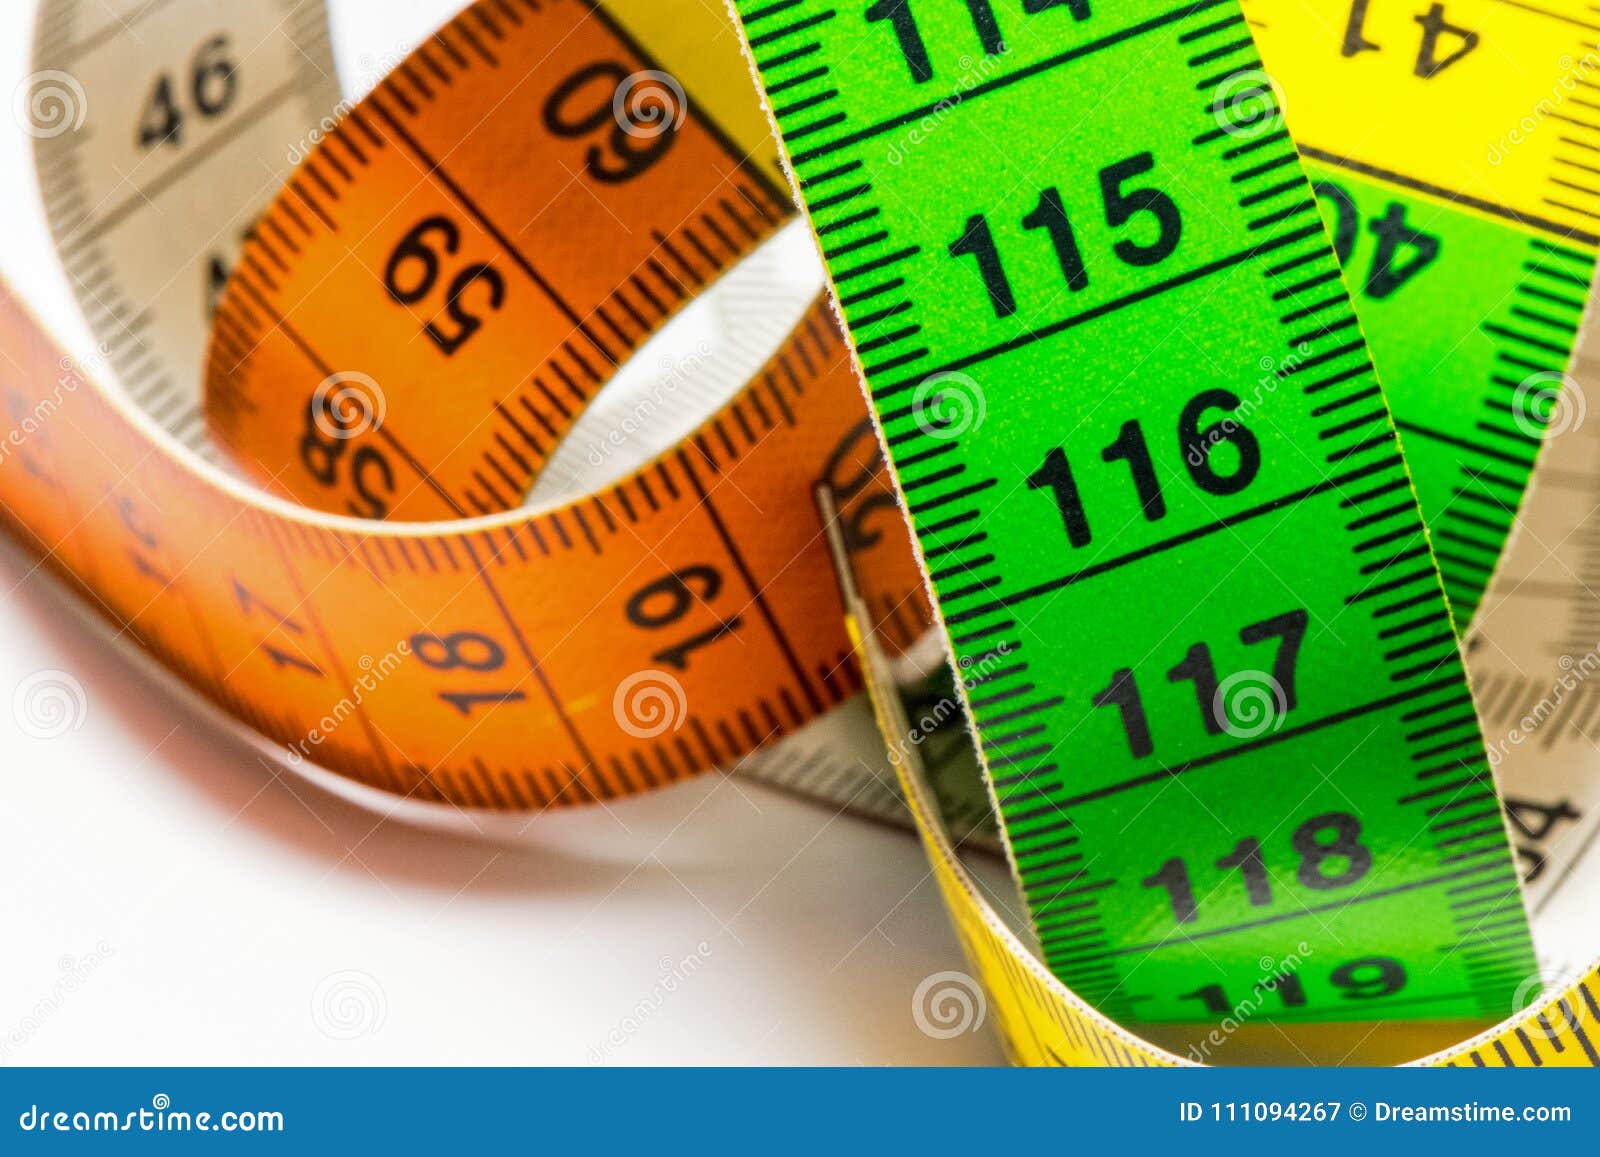 A Tape Measure As Used by People Who Make Their Own Clothes. Stock Image -  Image of tape, measuring: 111094267